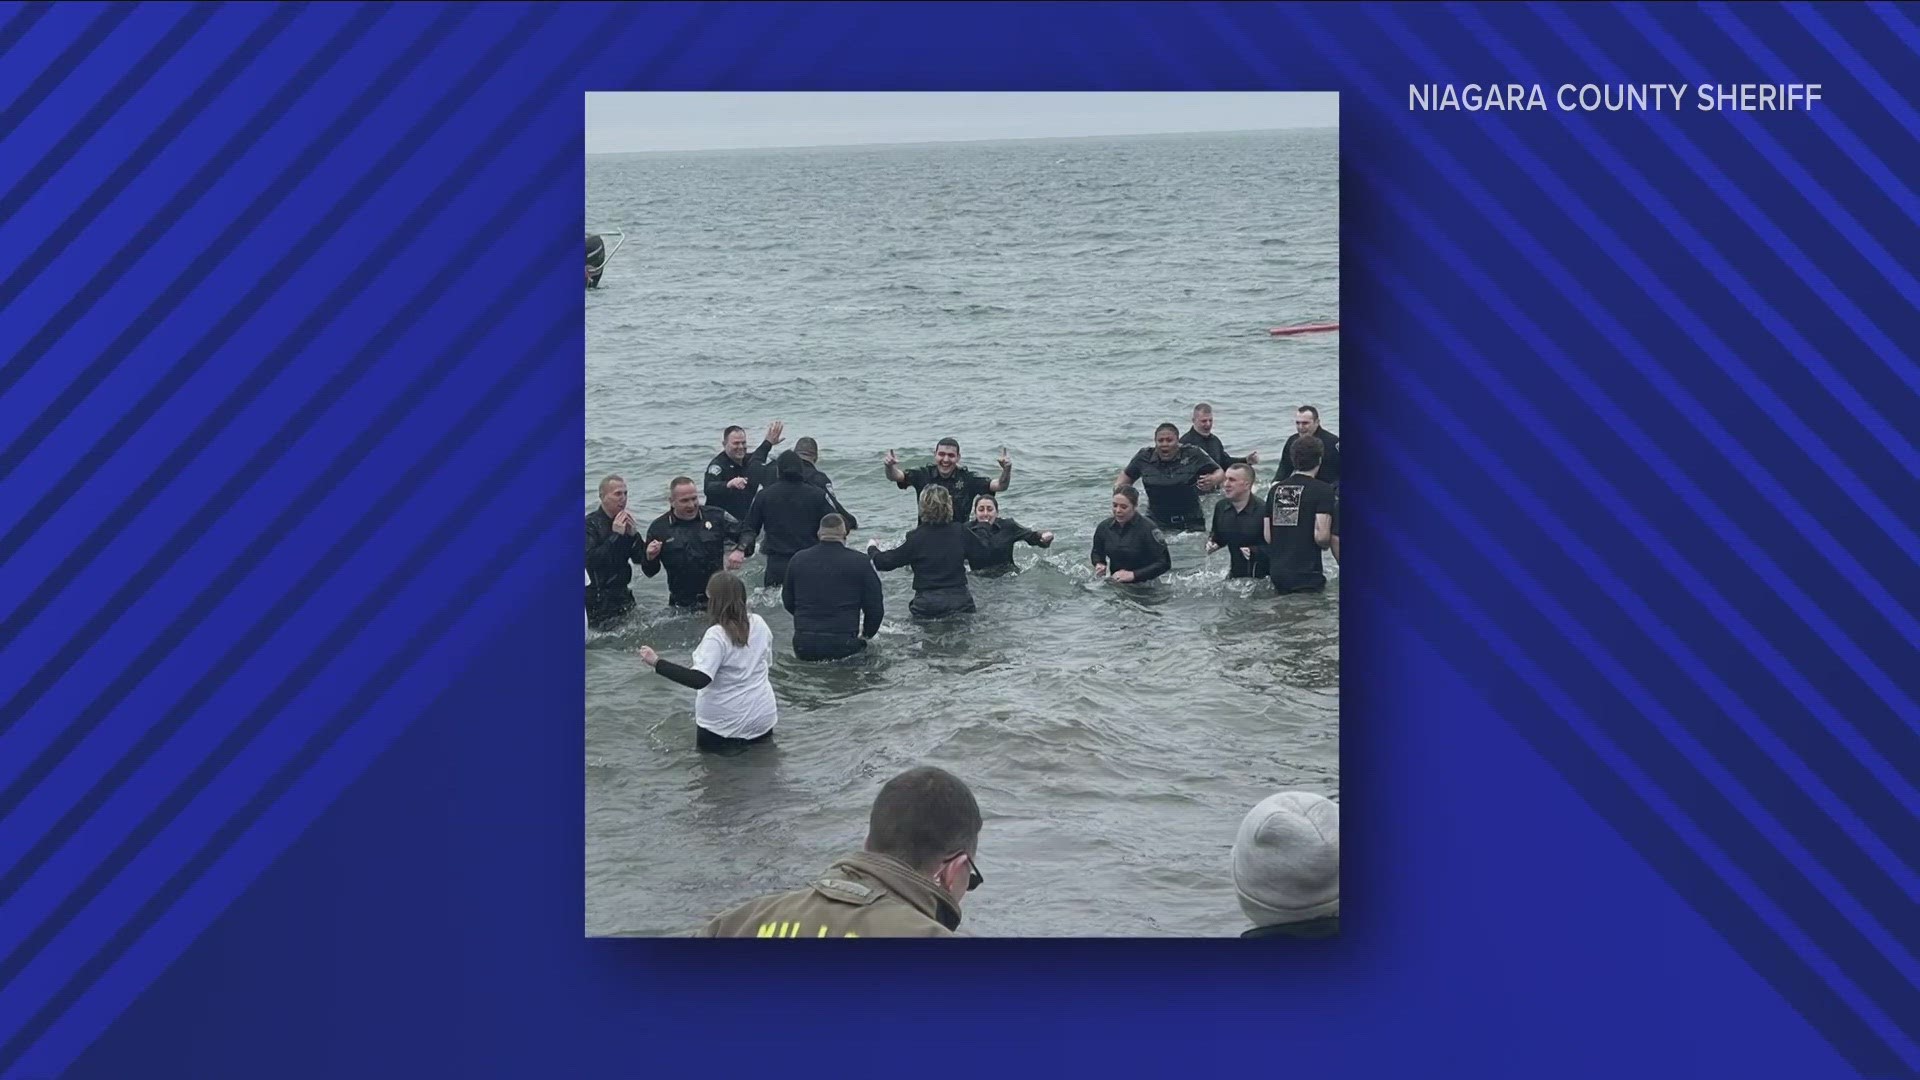 Dozens of people participated Sunday. That includes the Niagara County Sheriff's Office, with law enforcement joining the plunge for their third year in a row.